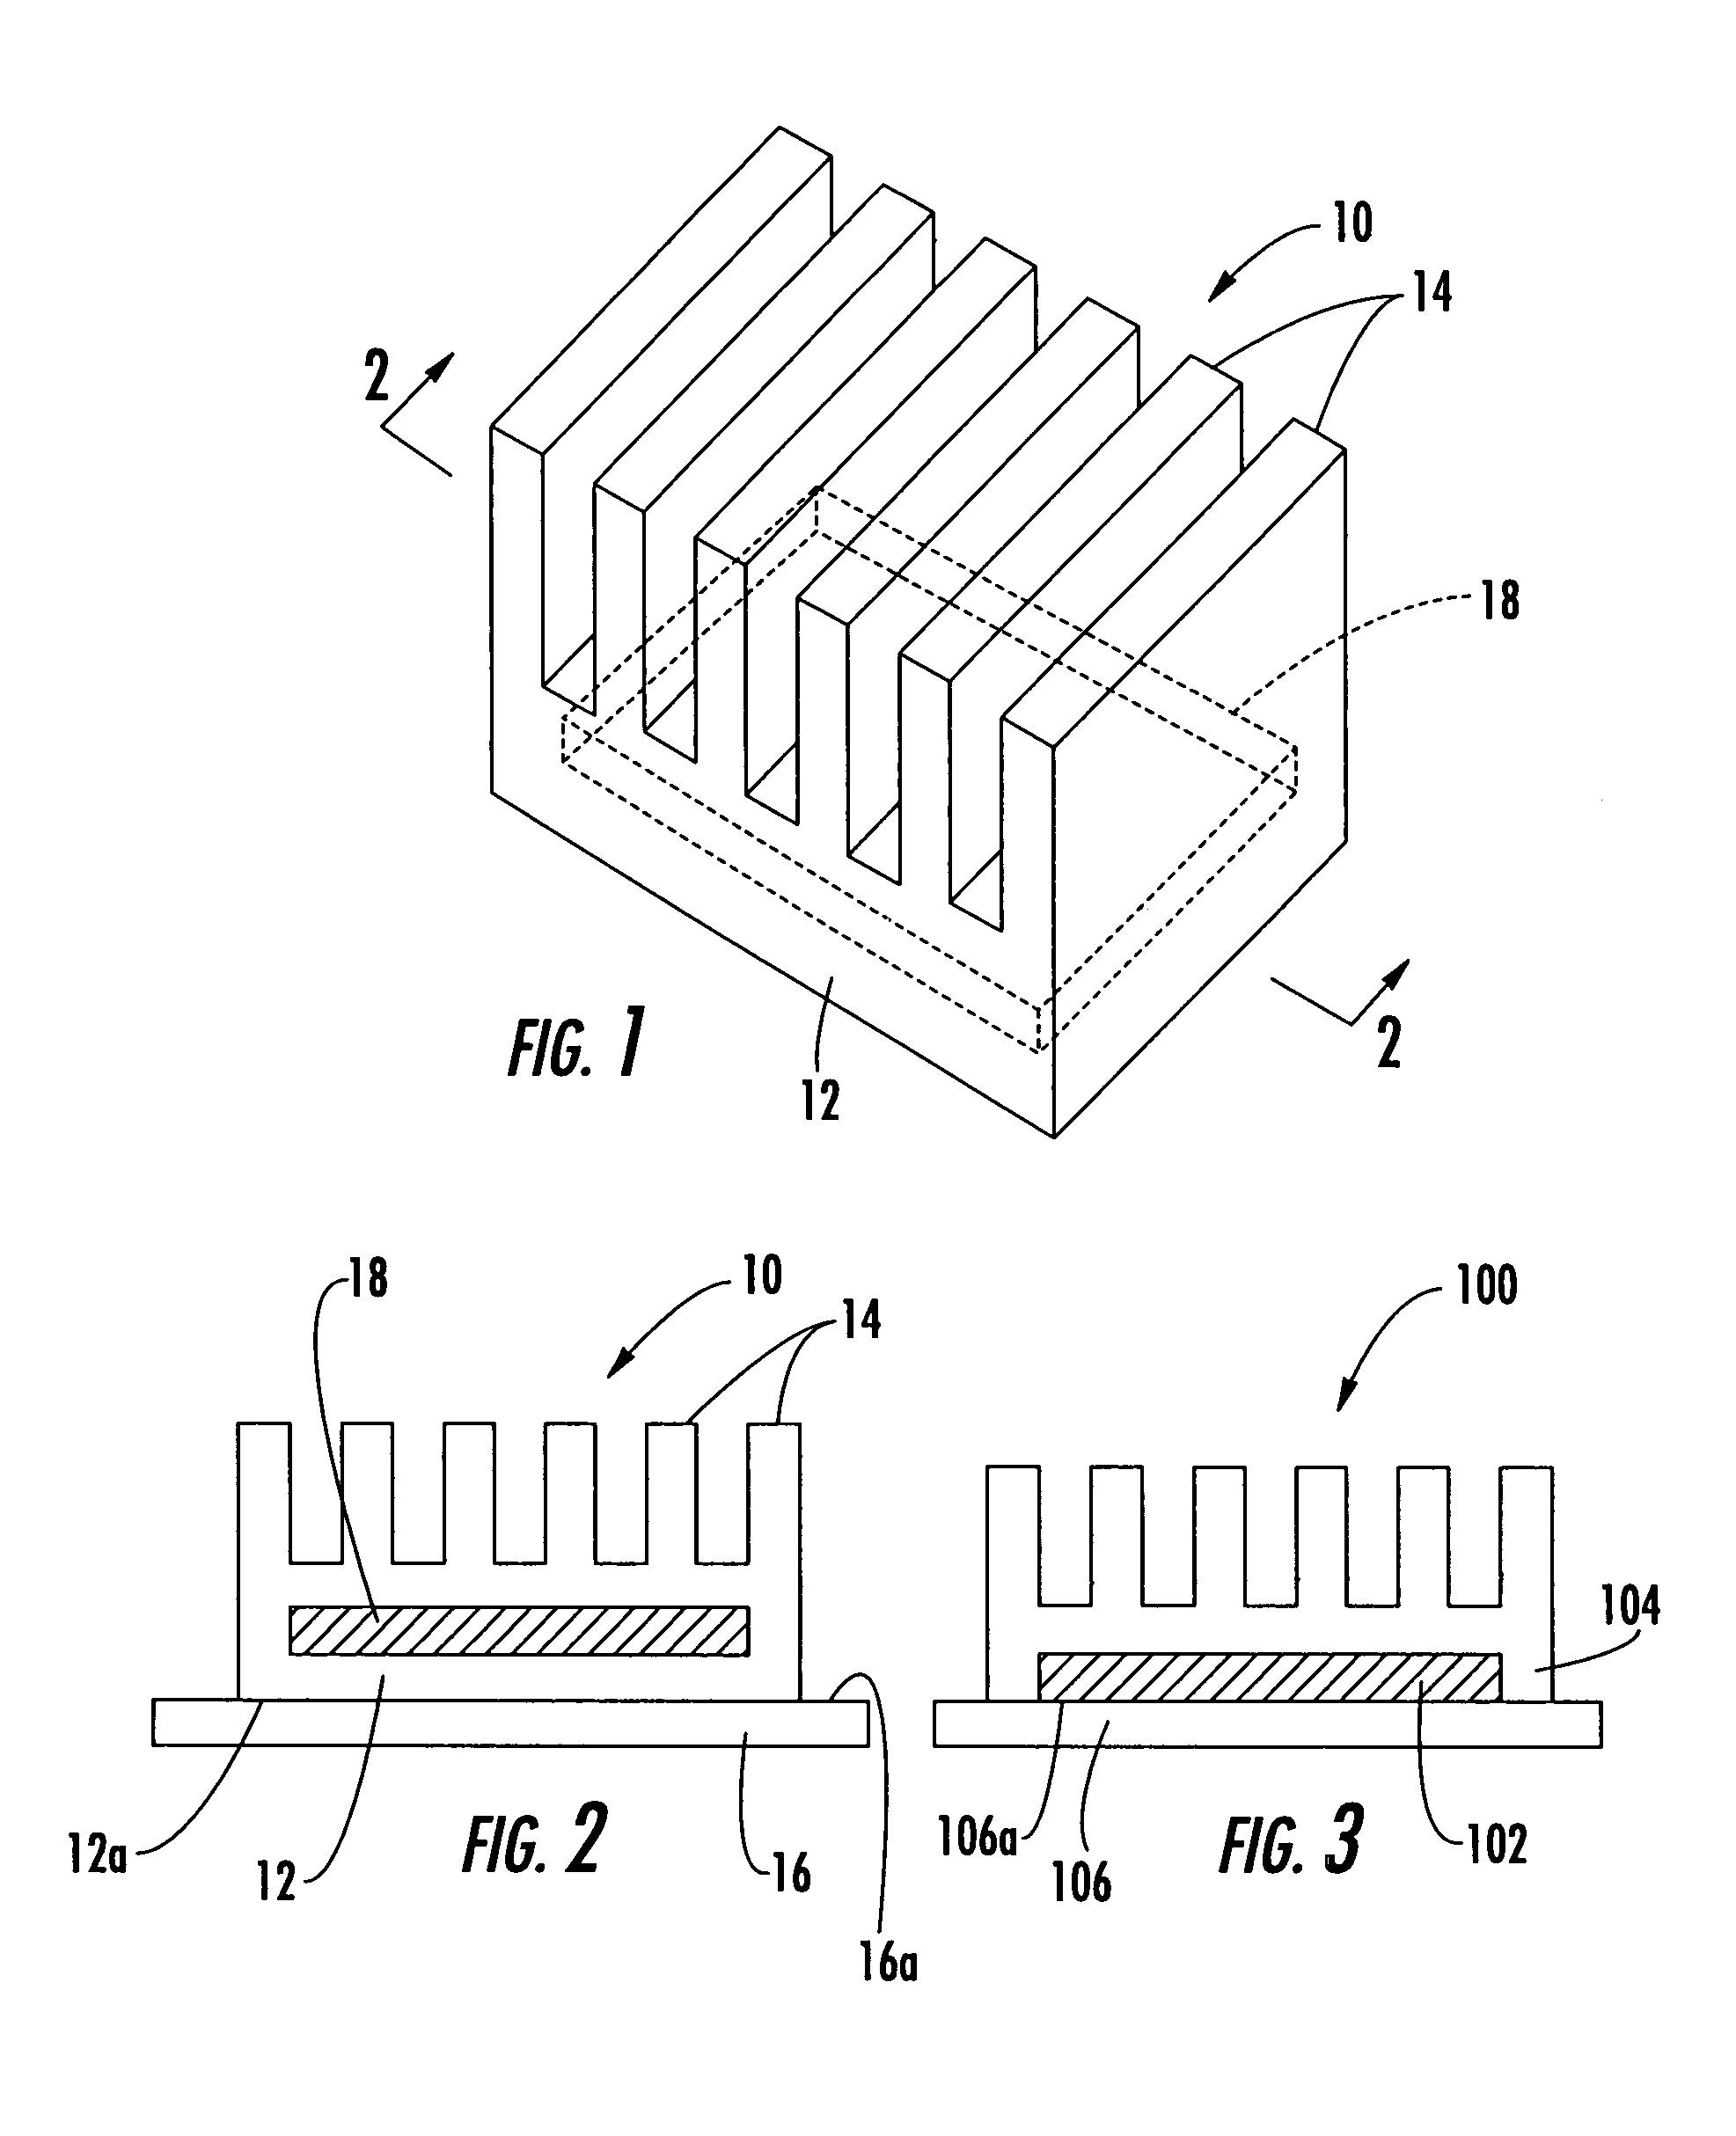 Heat sink assembly with overmolded carbon matrix